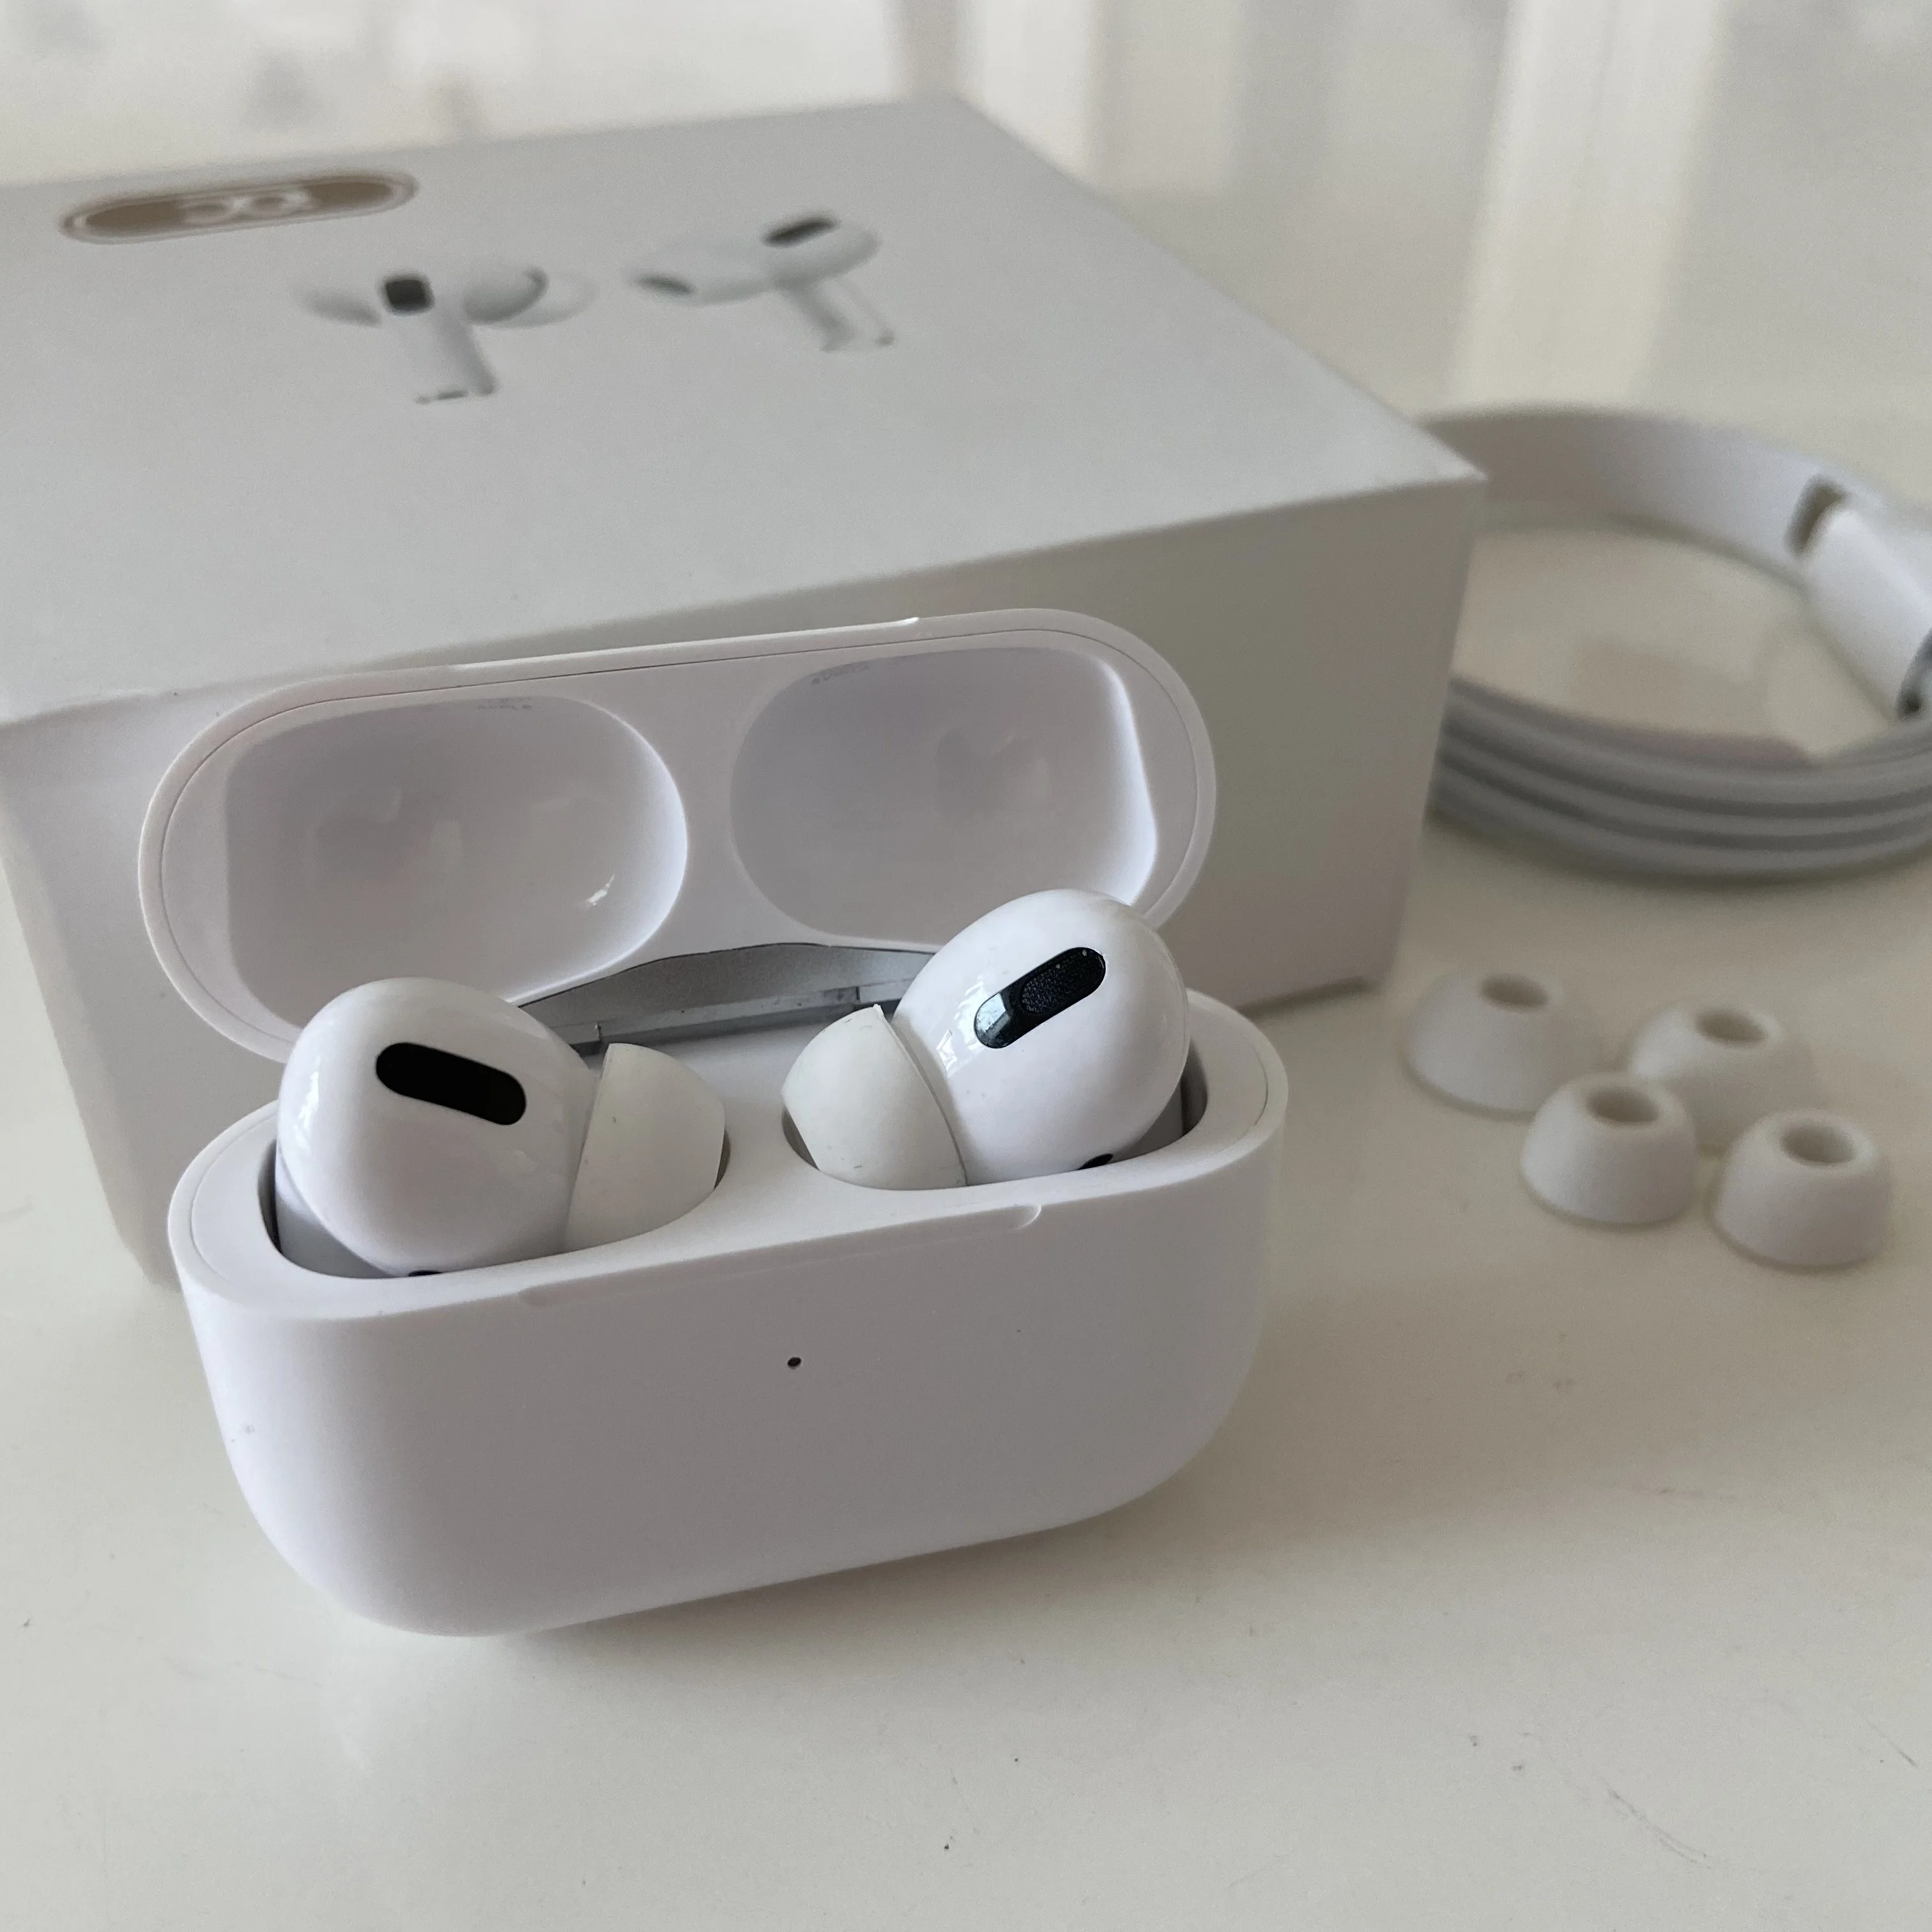 

Noise Reduction Original 1:1 Tws Air Pro Pods 2 3 Anc Airoha 1562a 1536 Wireless Earphone Airpodes For Airpodering Pro, White